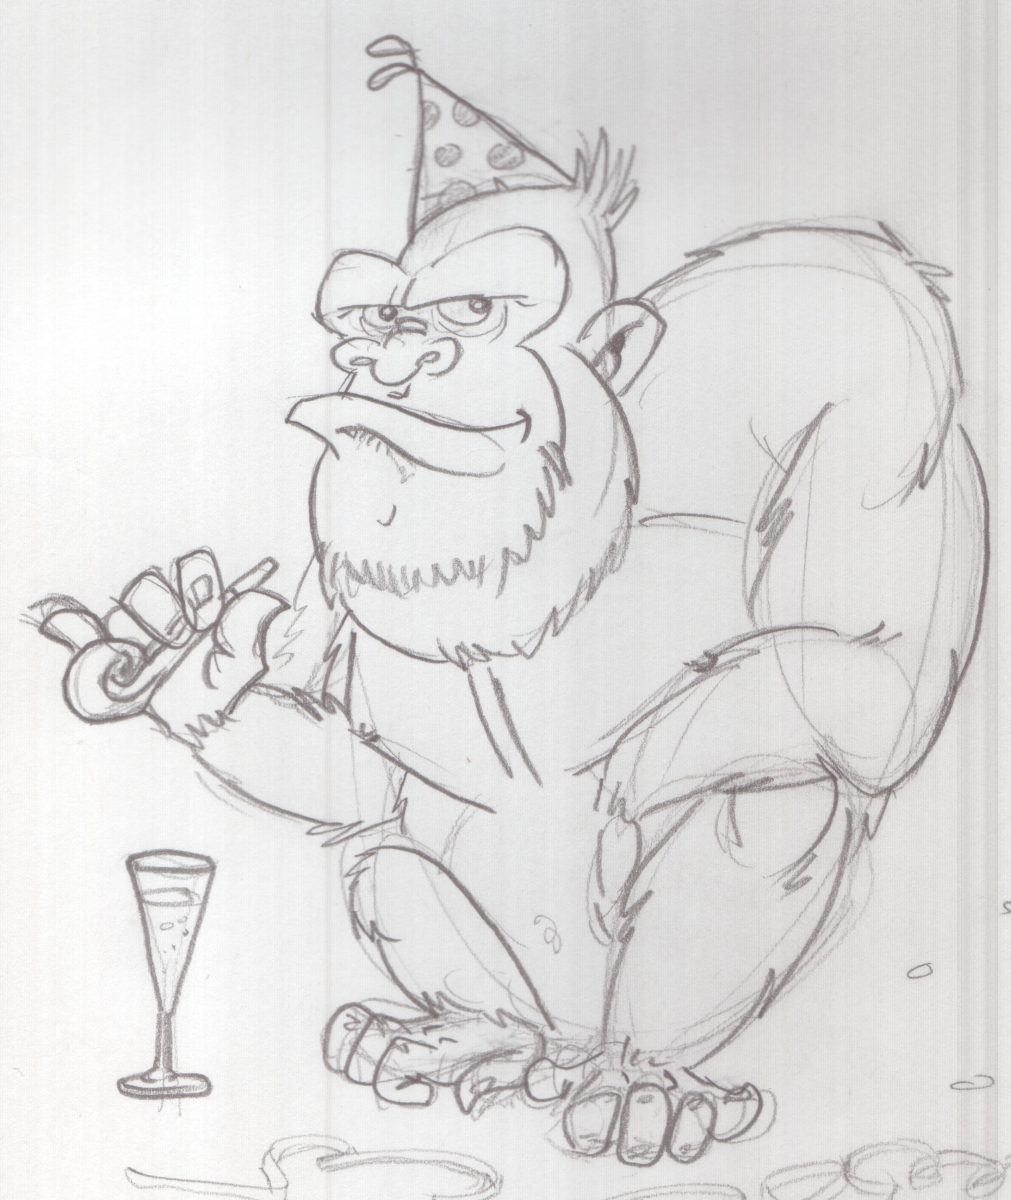 Year of the "monkey" sketch